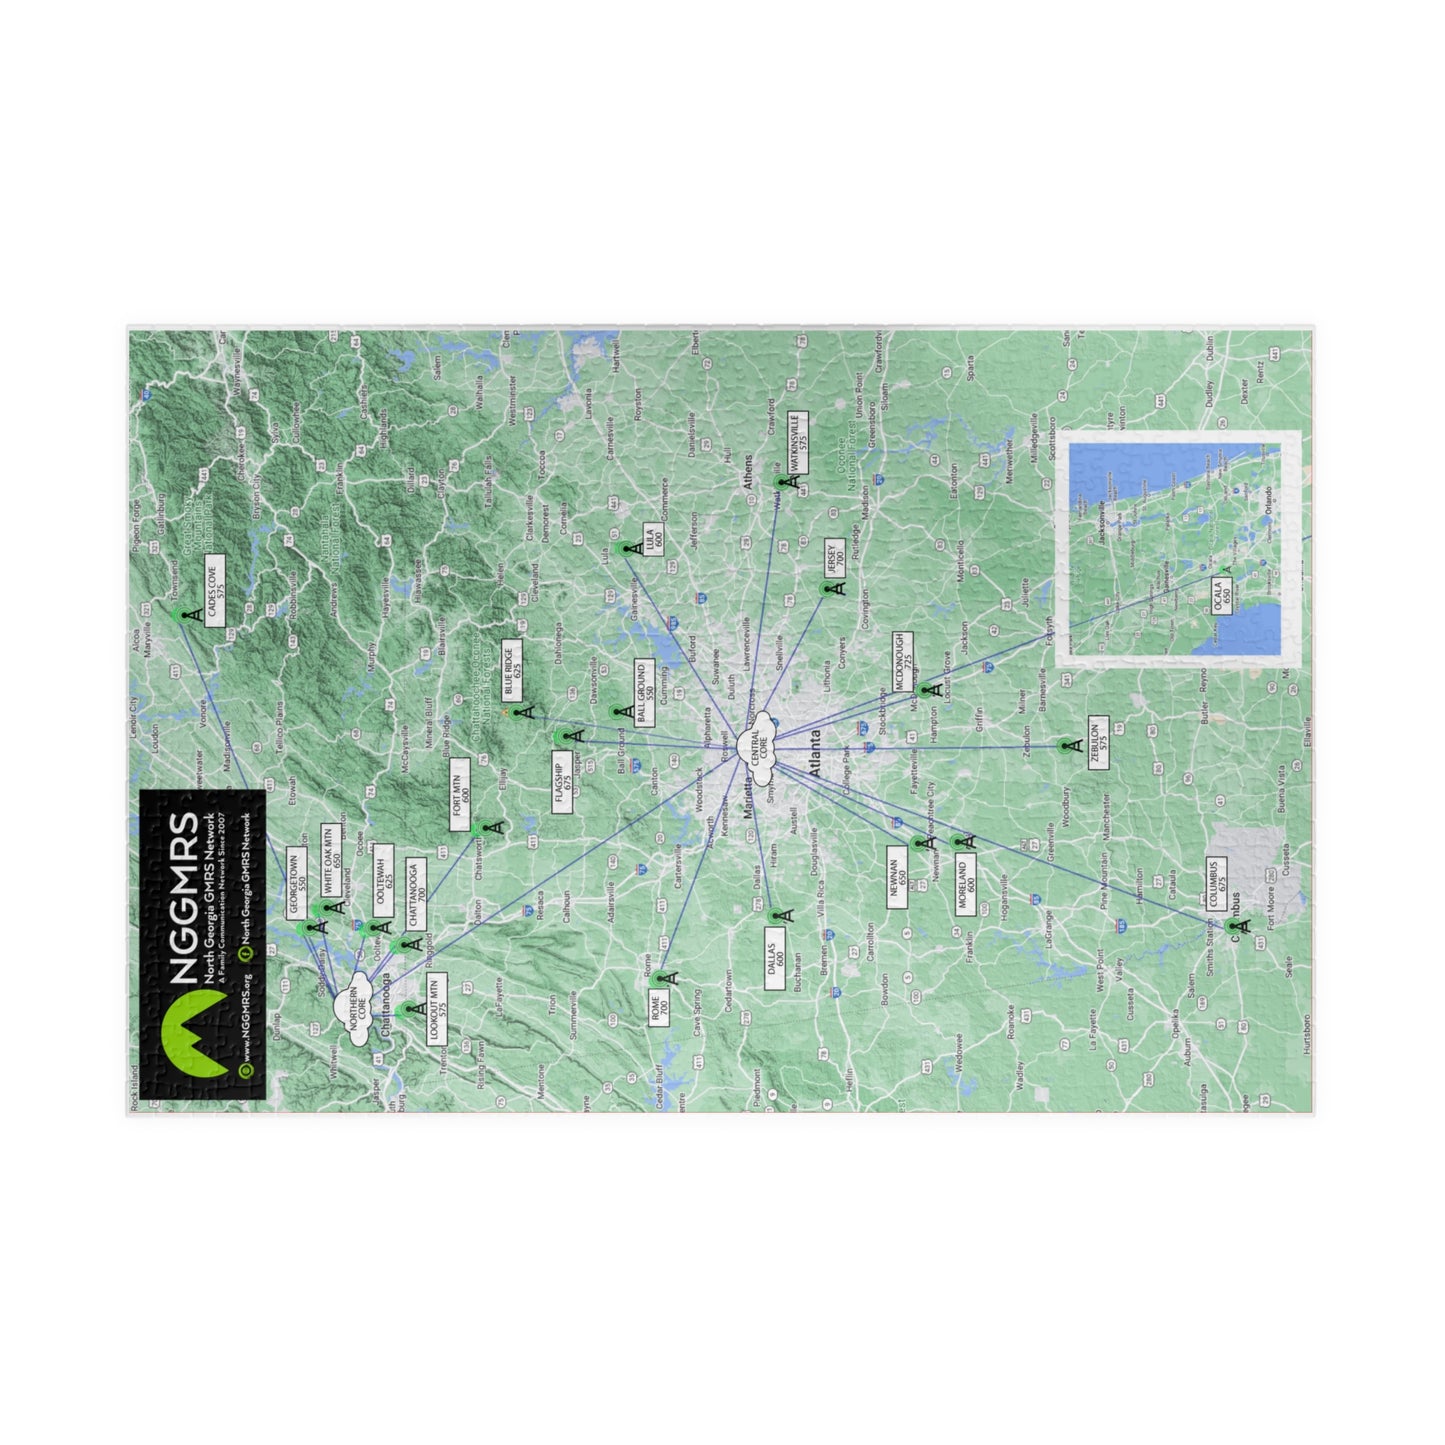 NGGMRS Repeater Map Puzzle - 1014-piece